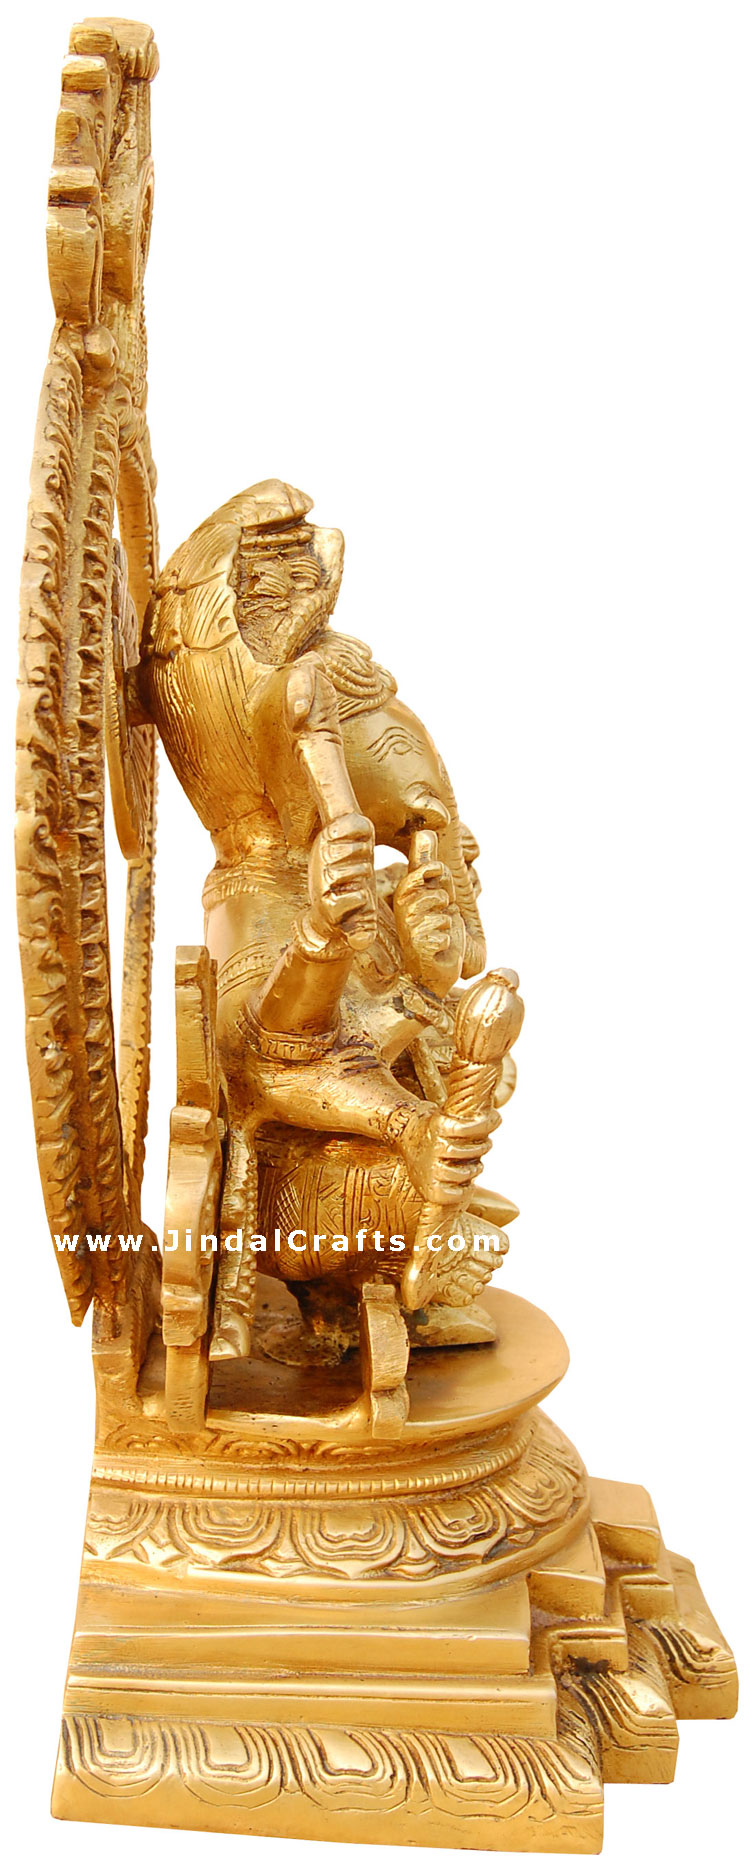 Ganesh - Hindu Religion Statue made from Brass India